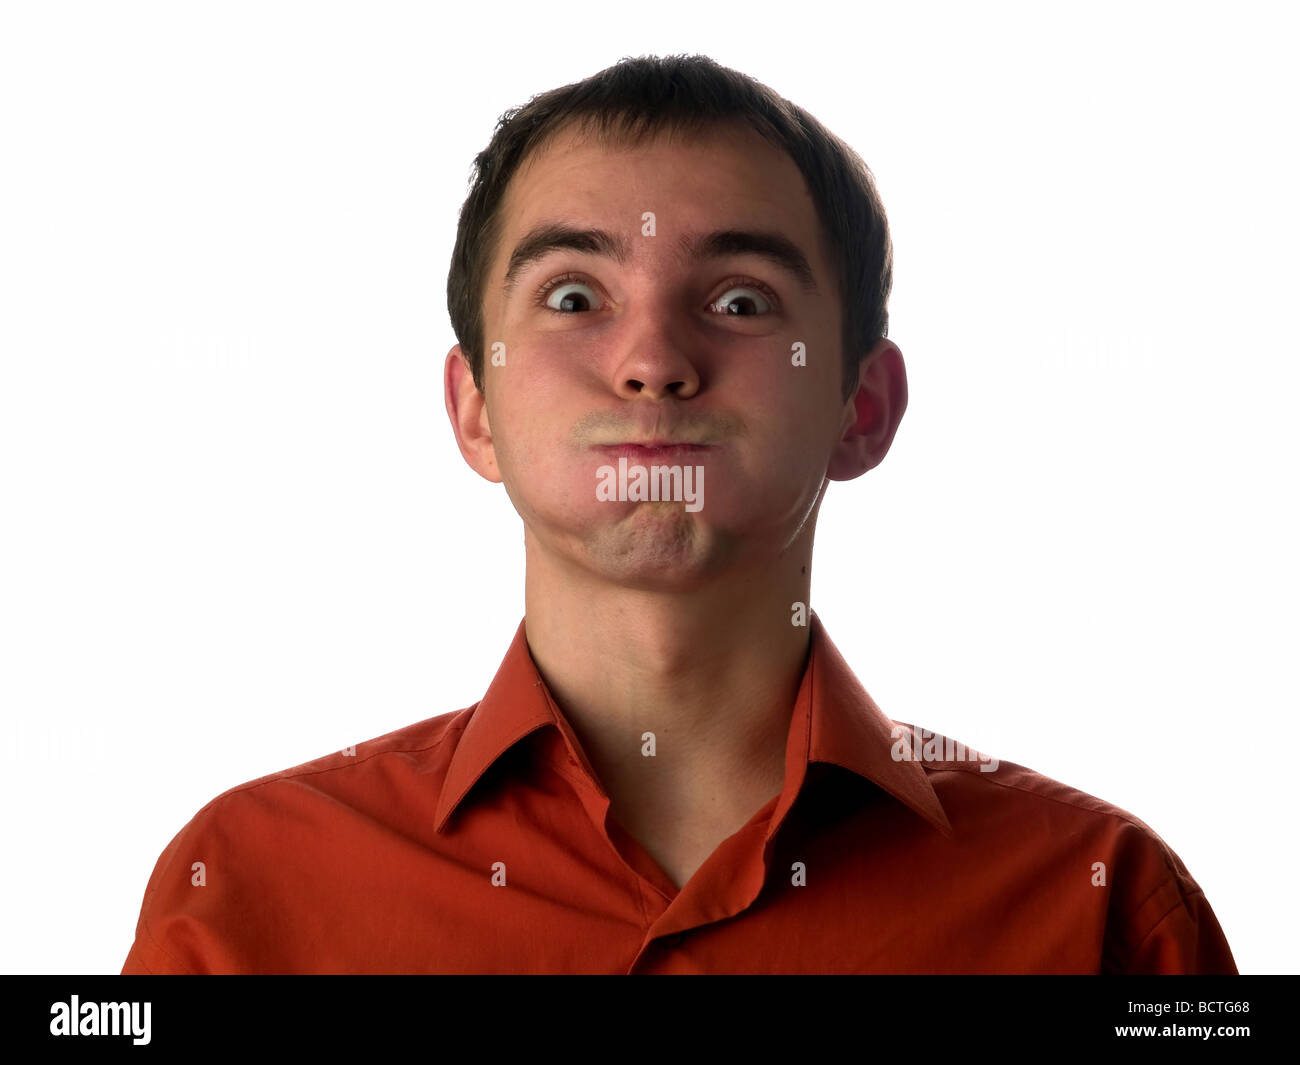 Stupid face expression young man looking camera Stock Photo